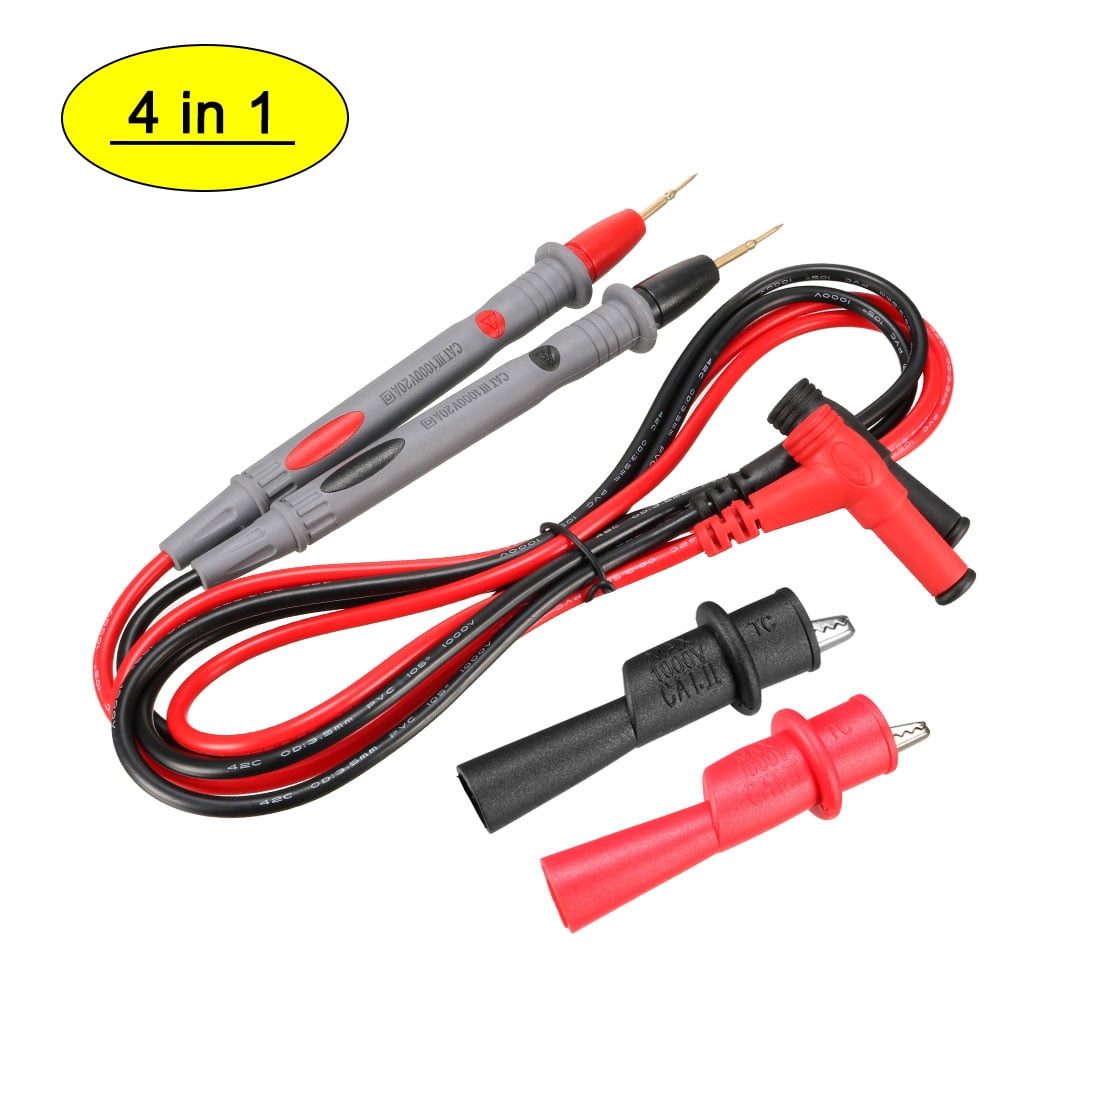 Multimeter Test Leads with 4mm Banana Plug Digital Multi Meter Clamp Tester Probe for Multimeters Electronic Test Leads Pen Accessories